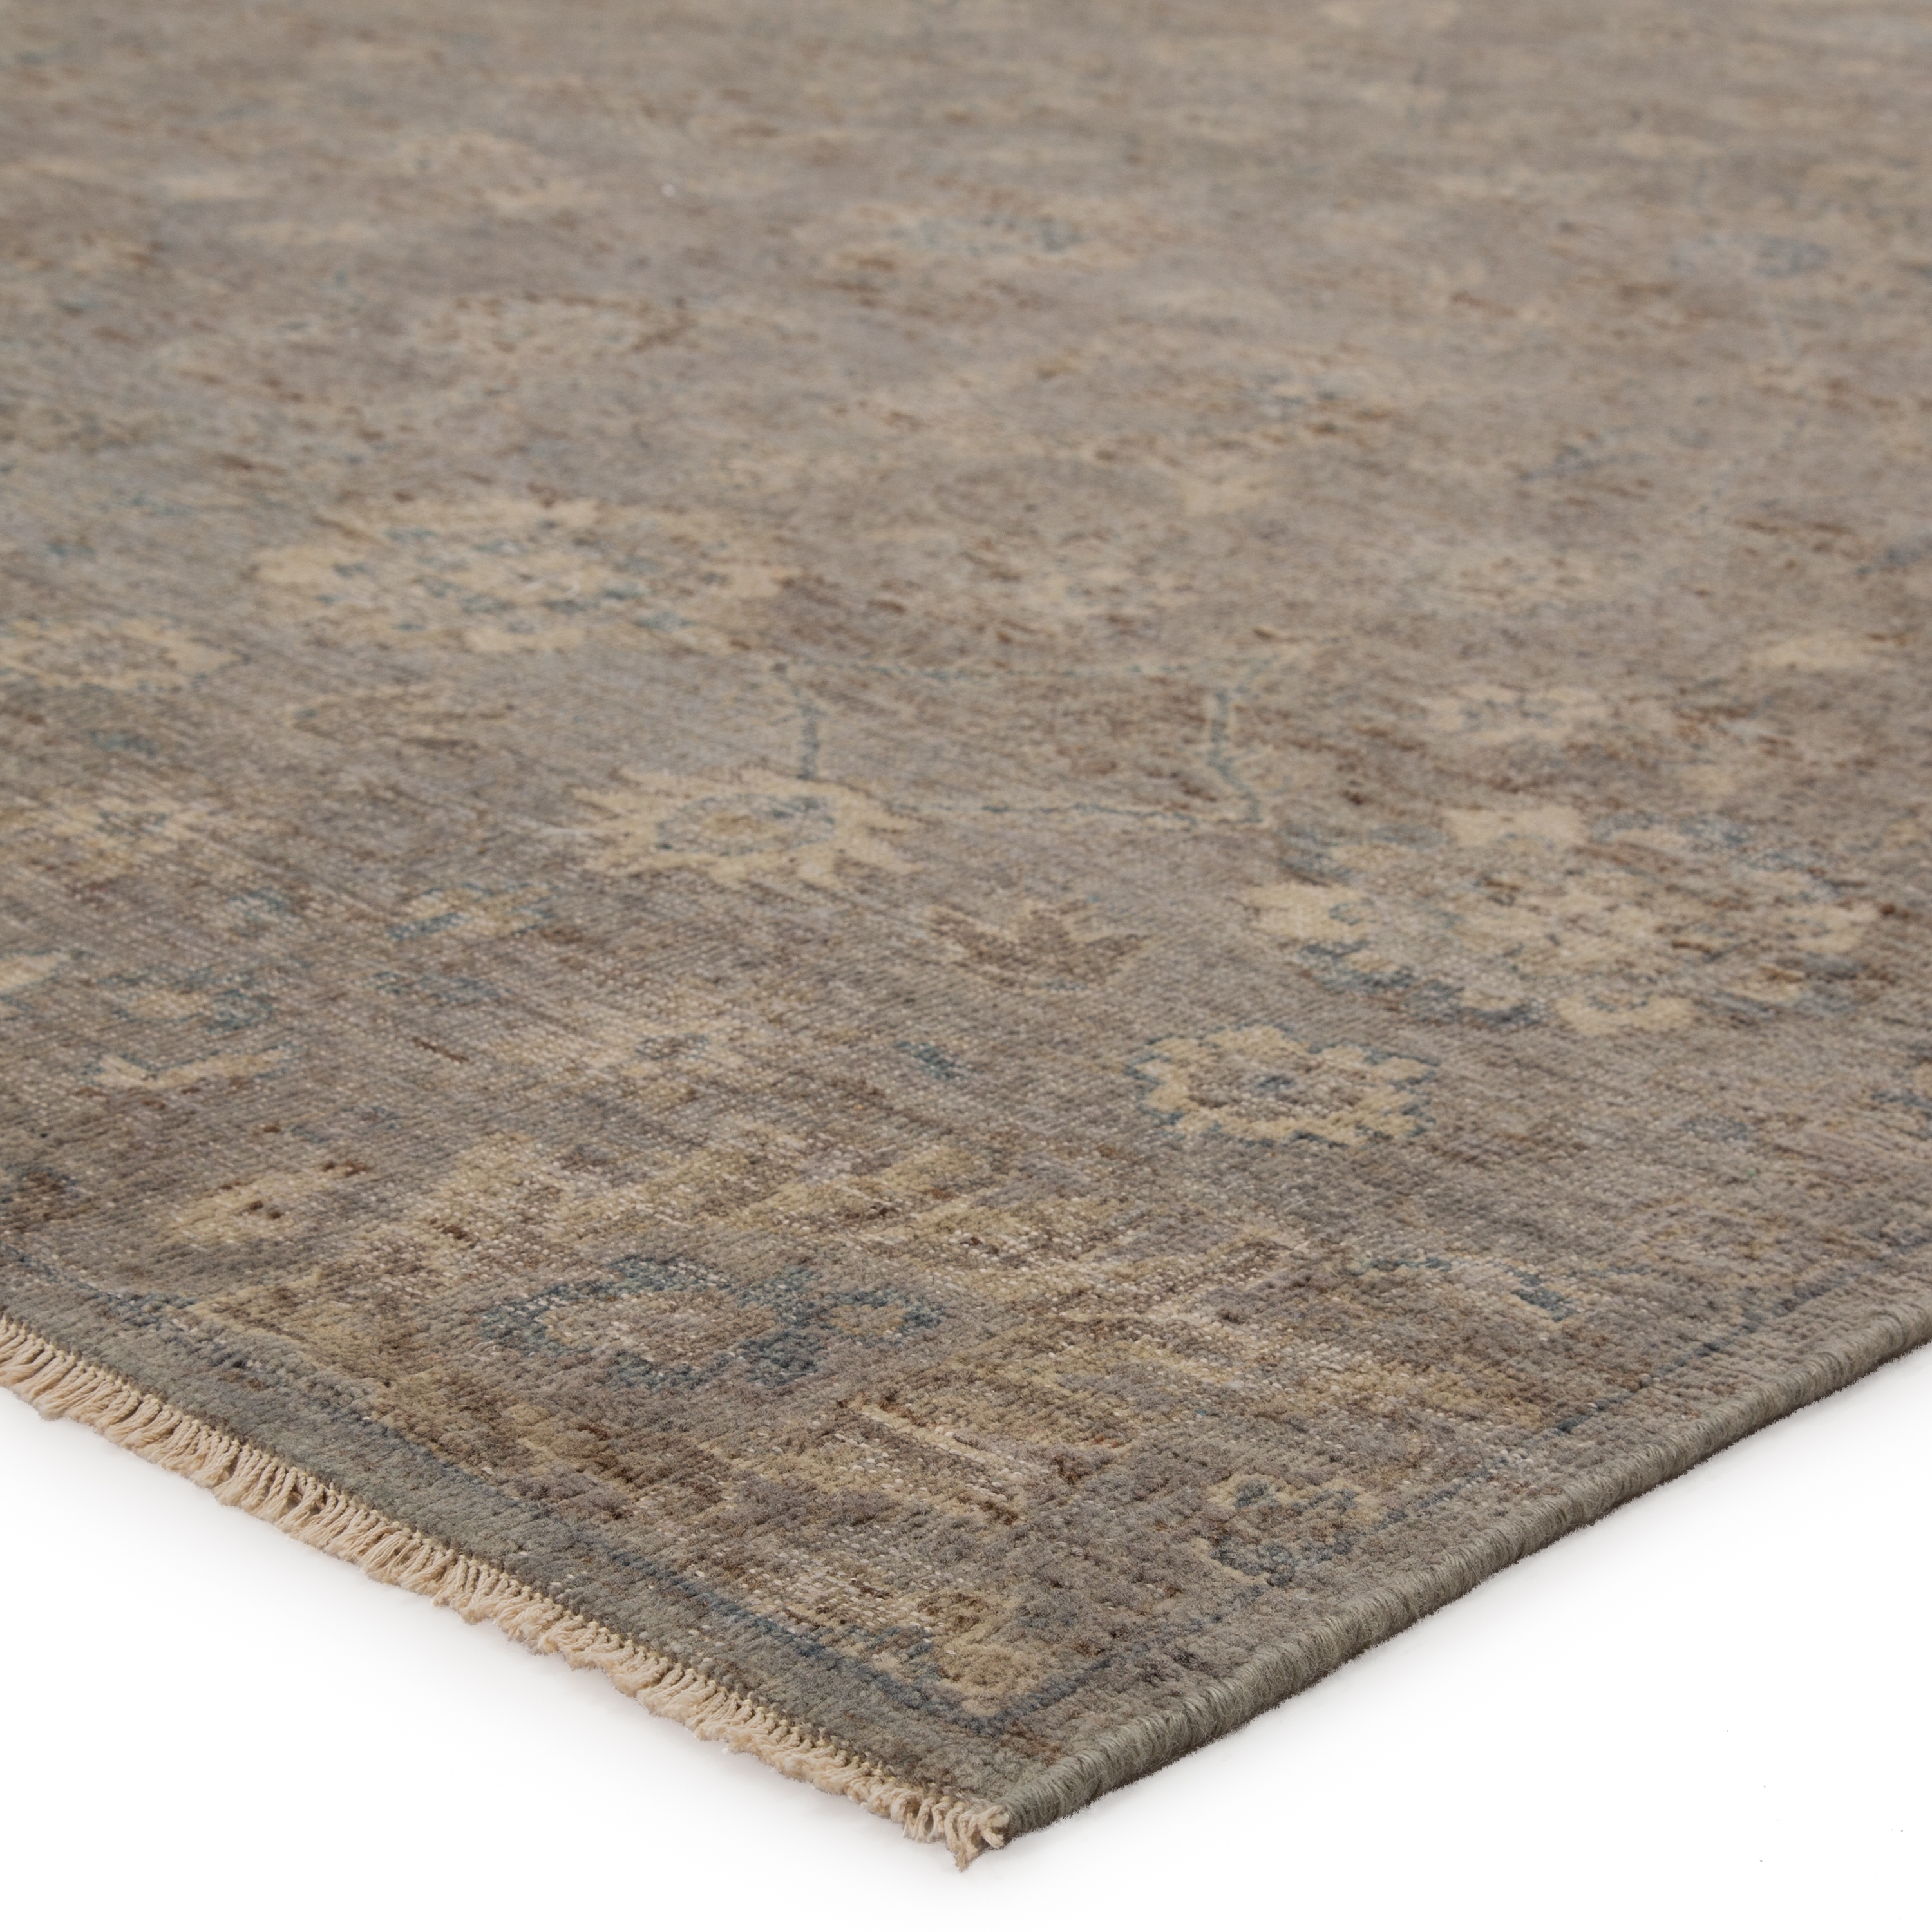 Pembe Hand-Knotted Oriental Gray/ Blue Area Rug (10'X14') - Image 1